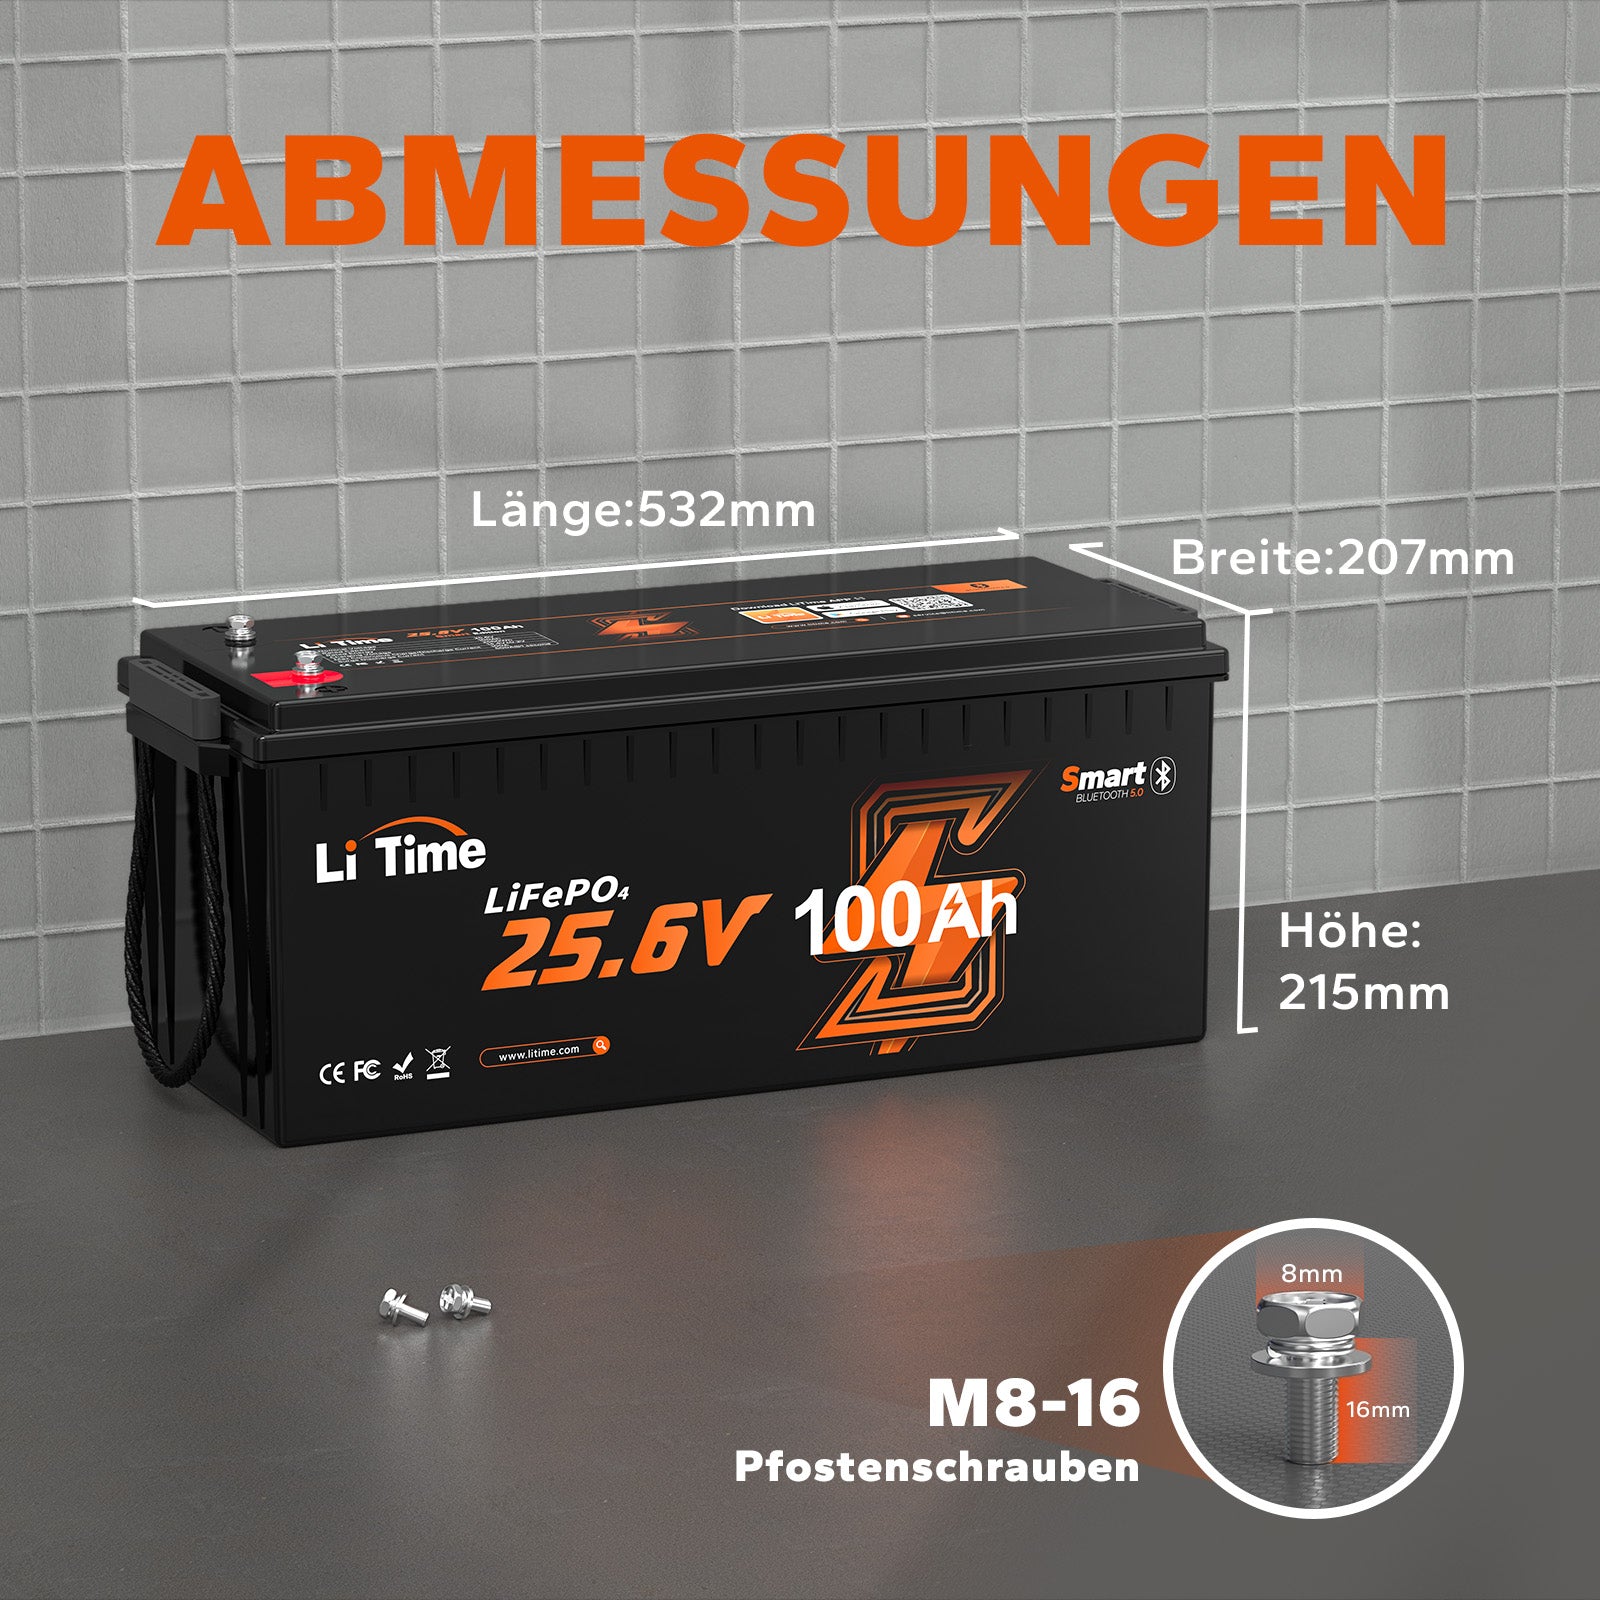 ⚡Early bird price: €599.99⚡LiTime 24V 100Ah LiFePO4 with Bluetooth and Smart BMS, low temperature protection